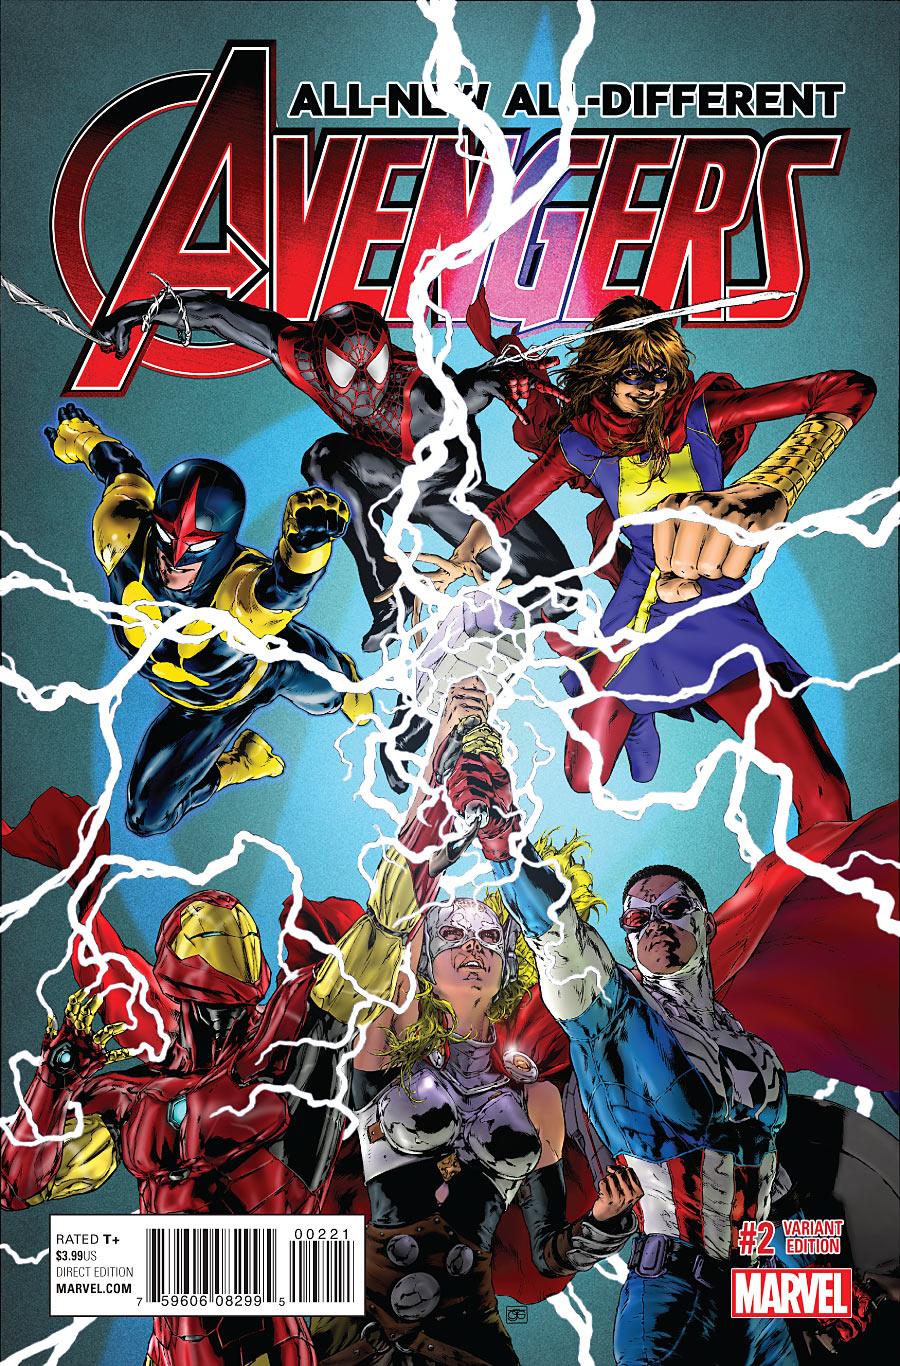 All-New All-Different Avengers #2